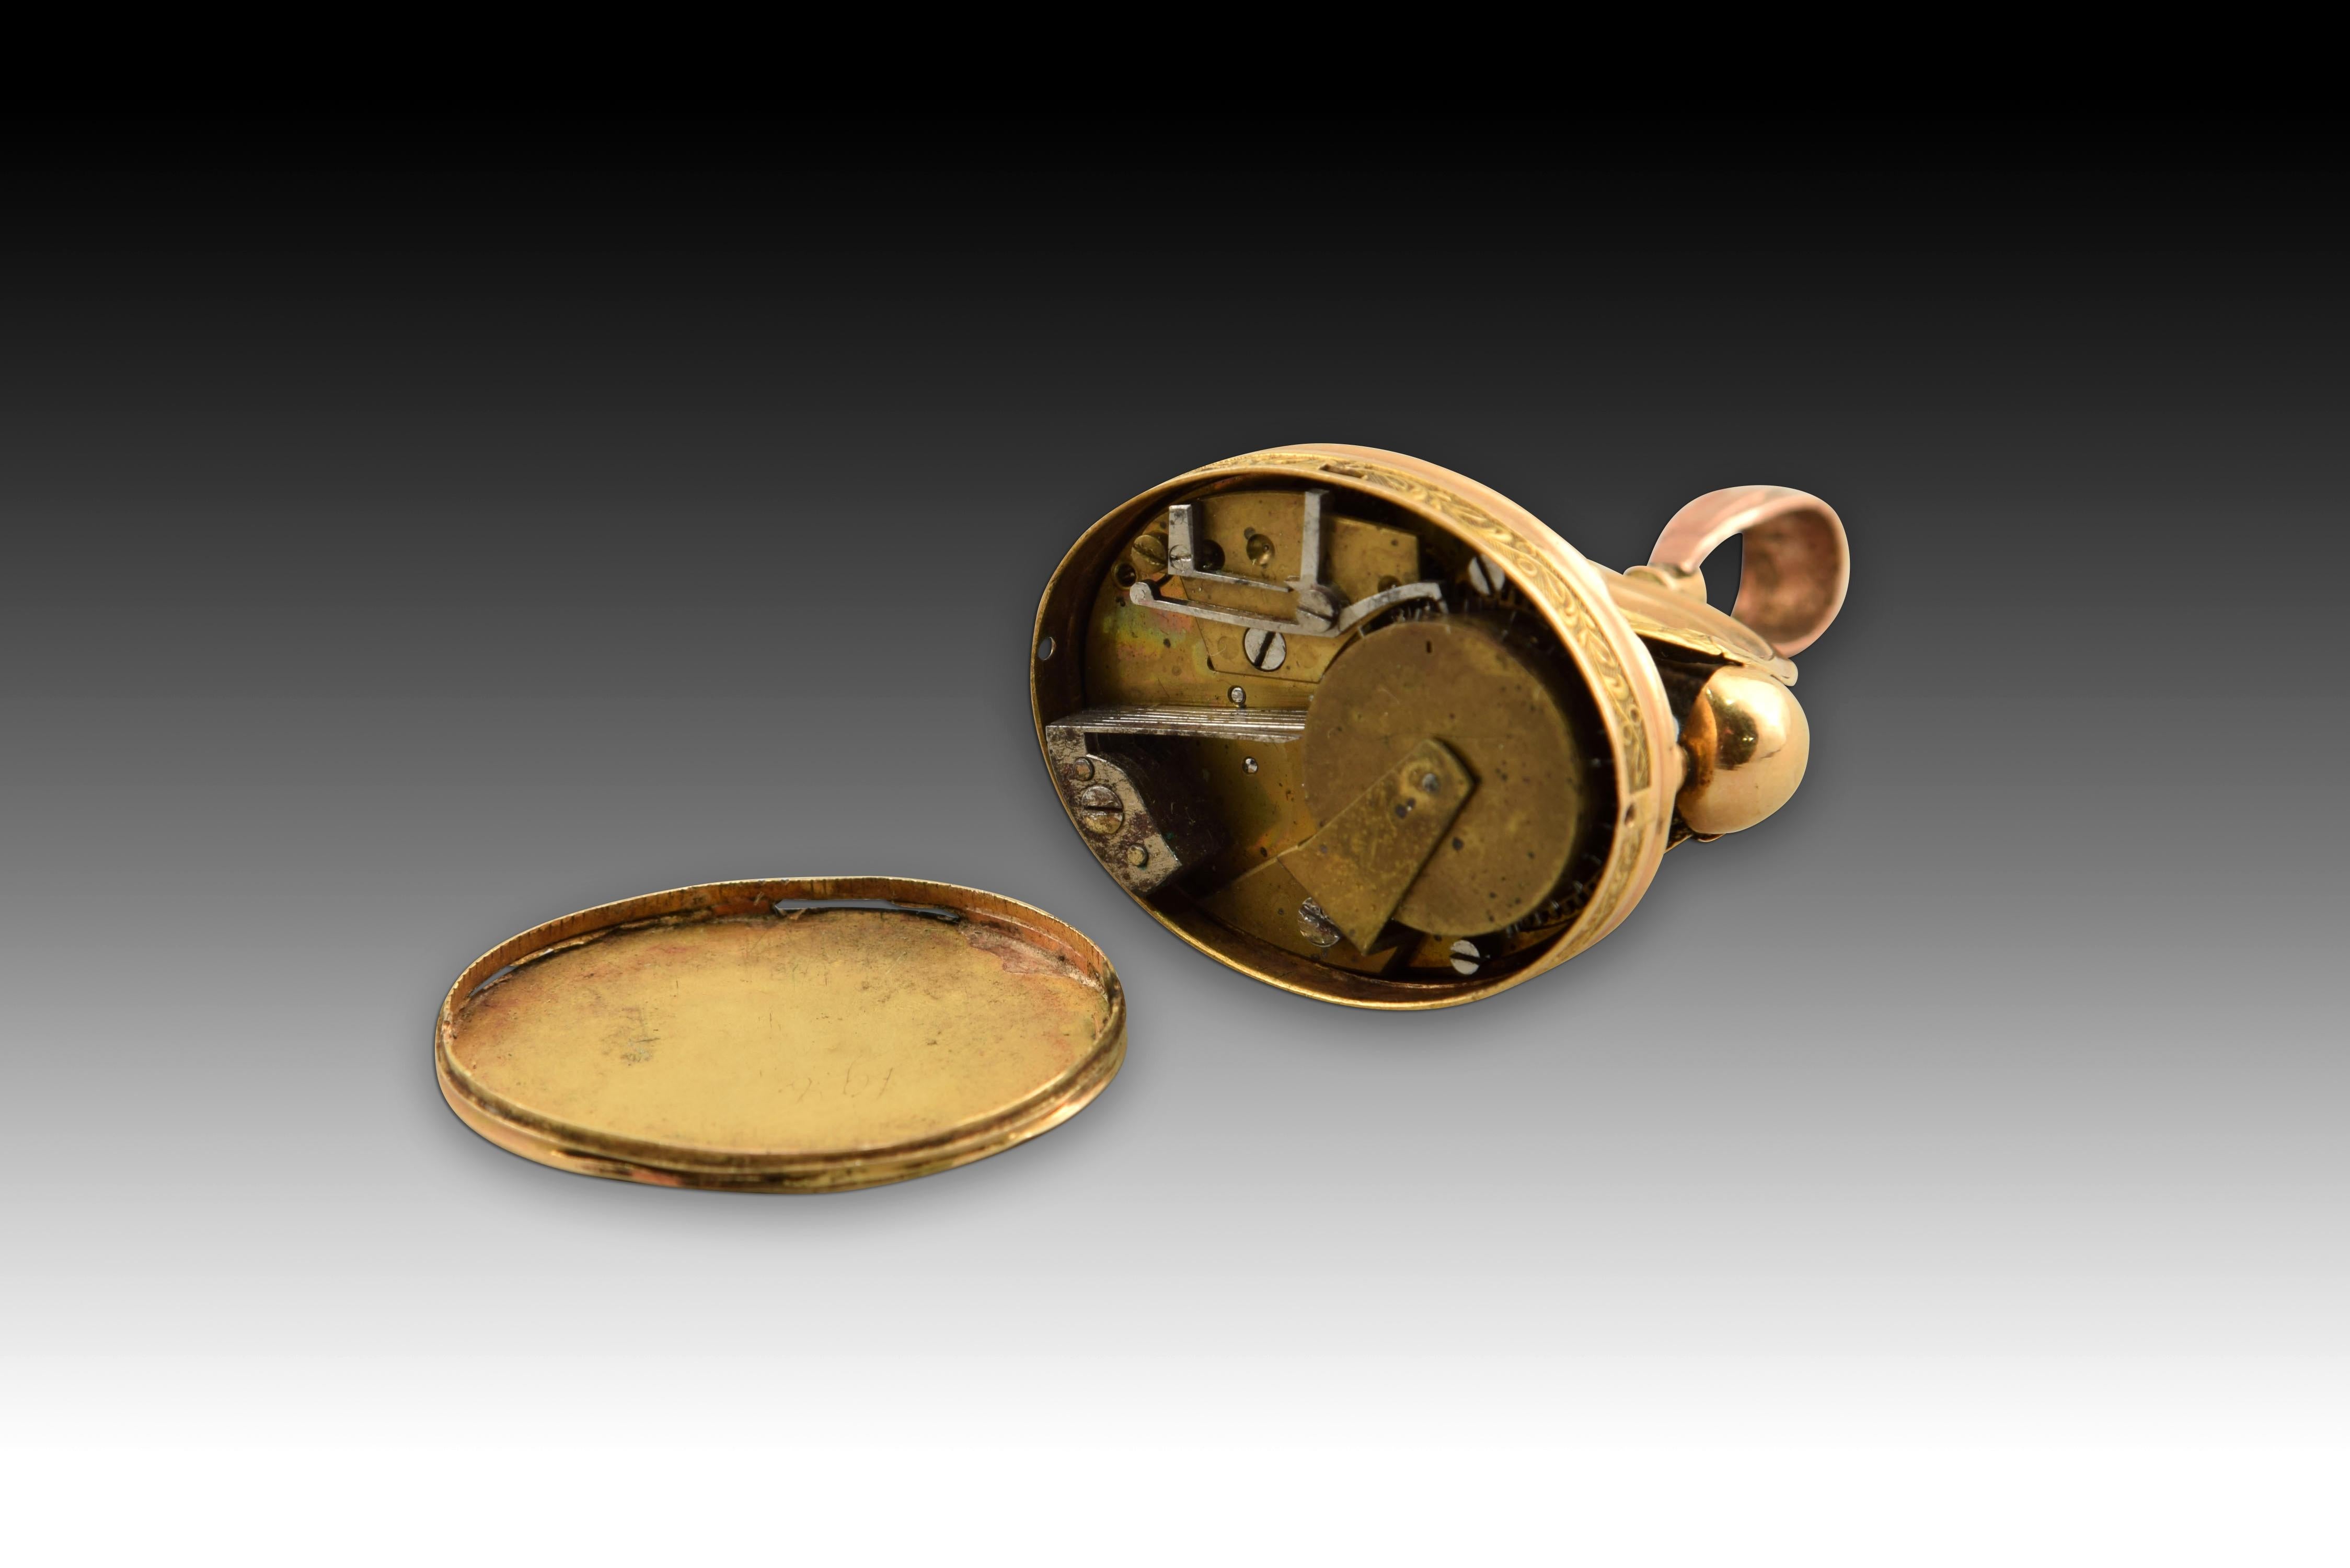 Pendant with music box. Gold. Switzerland, around 1820. 
Pendant made of gold of alloys with different metals to give it different tones that presents a piece in the upper part (which winds the mechanism of the music box), an arch finished in two